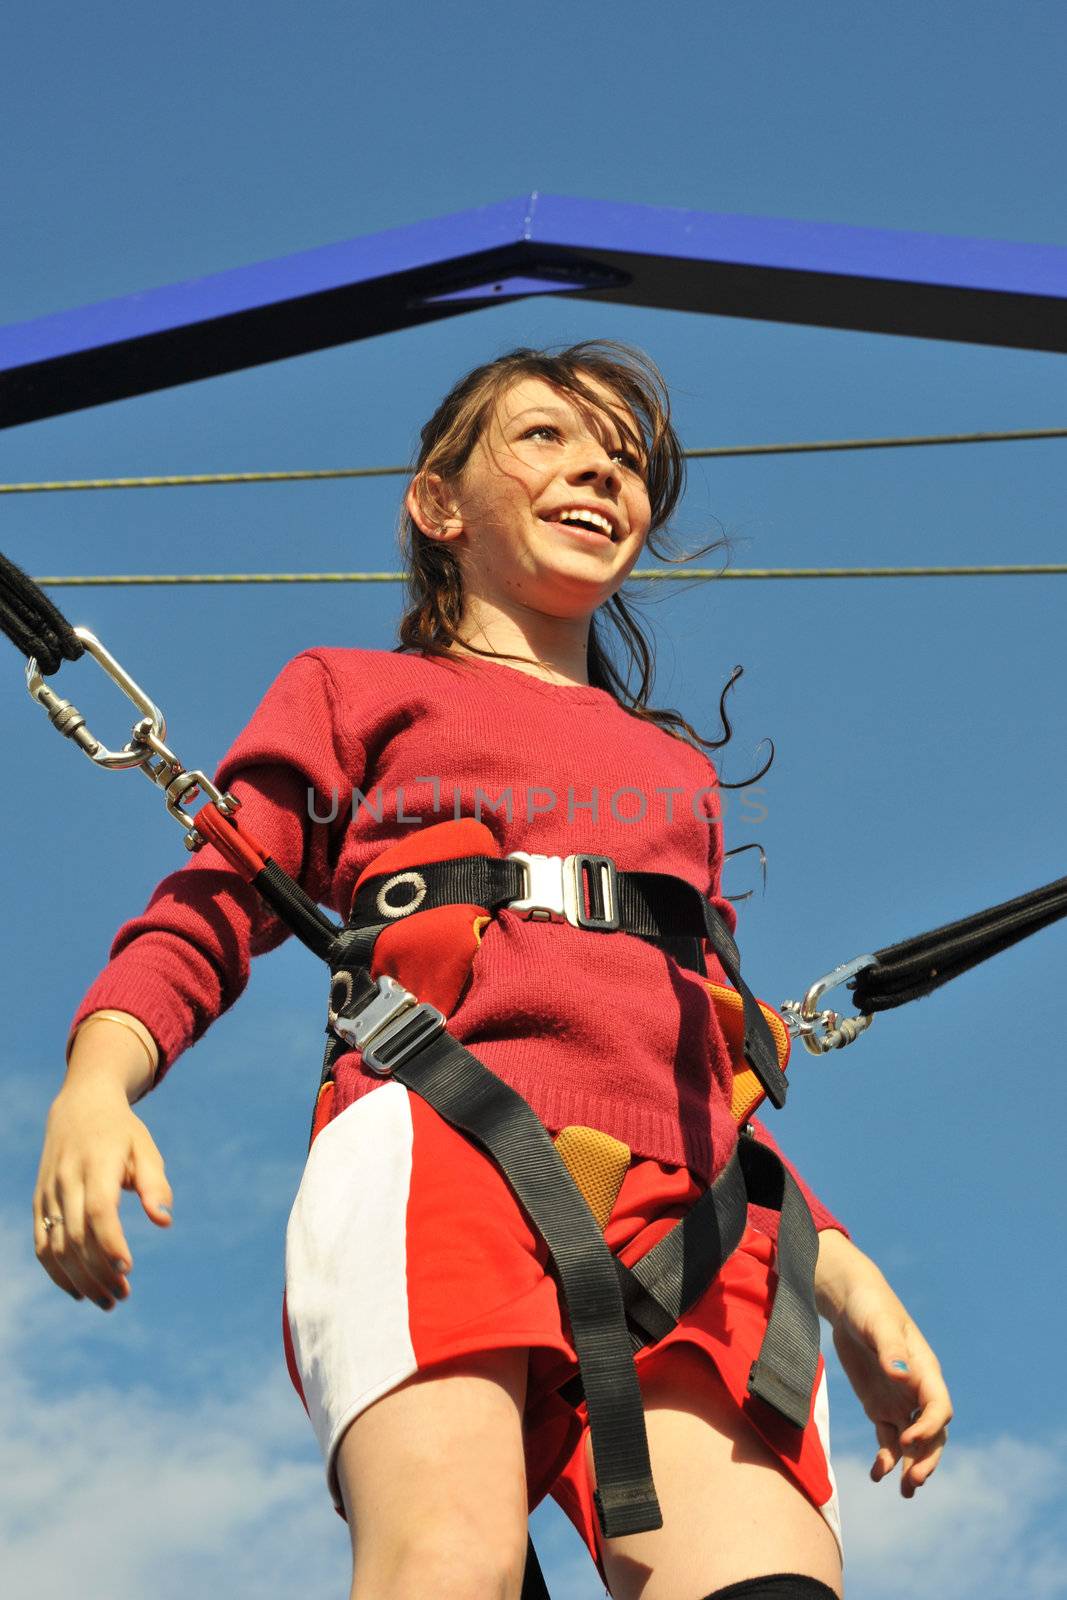 young teenager smiling on the trampoline (bungee jumping).